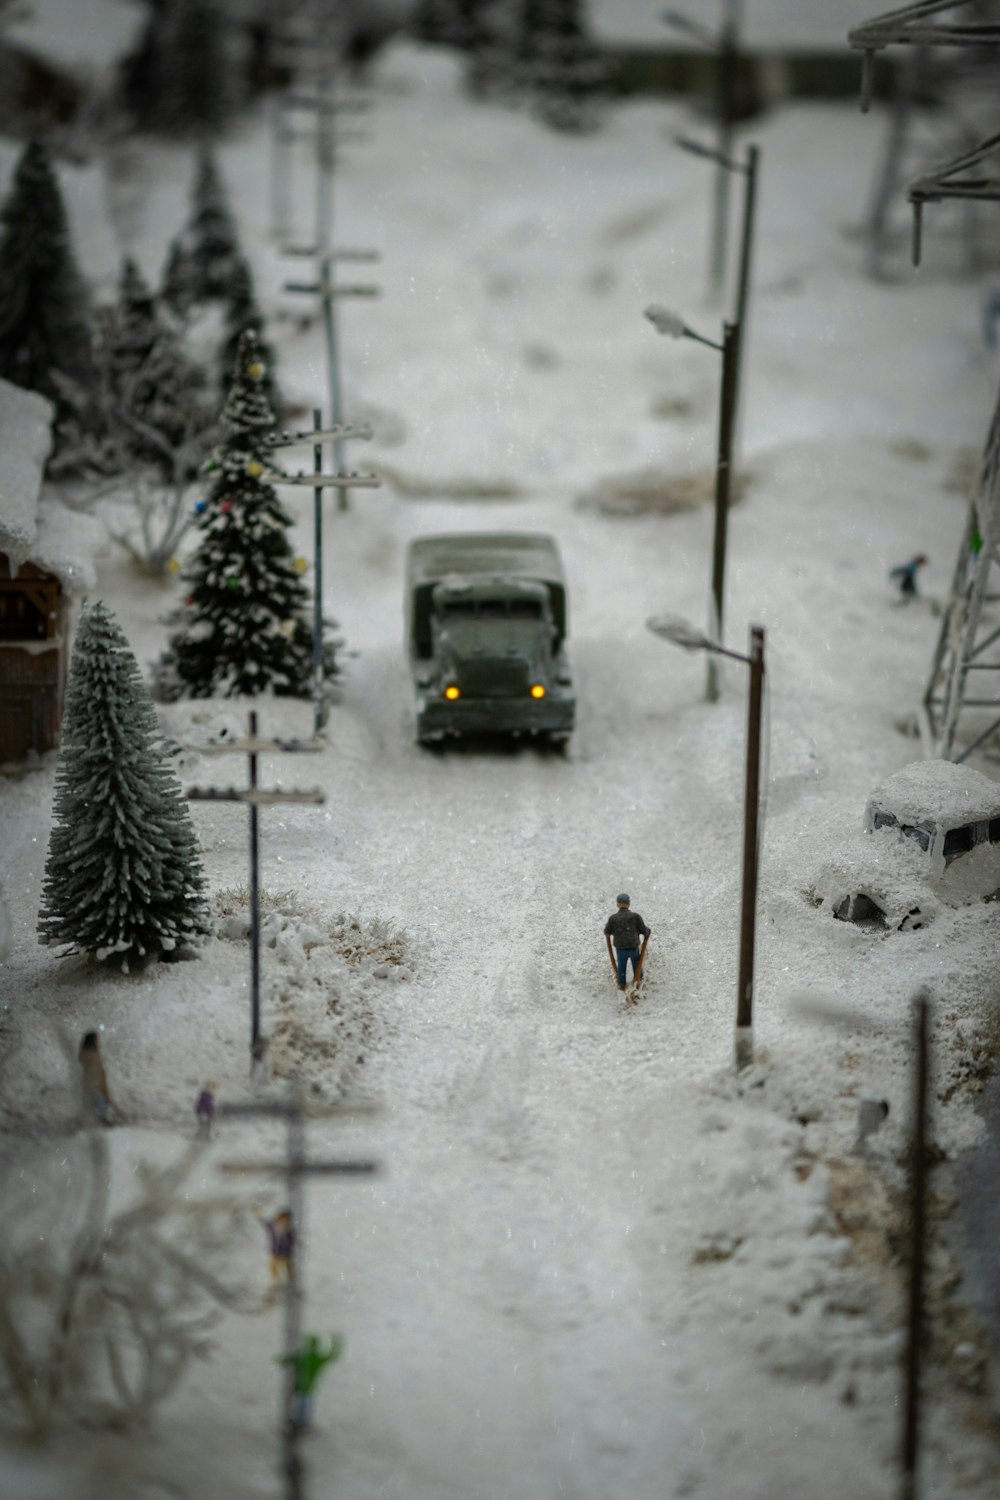 a toy car driving down a snow covered road